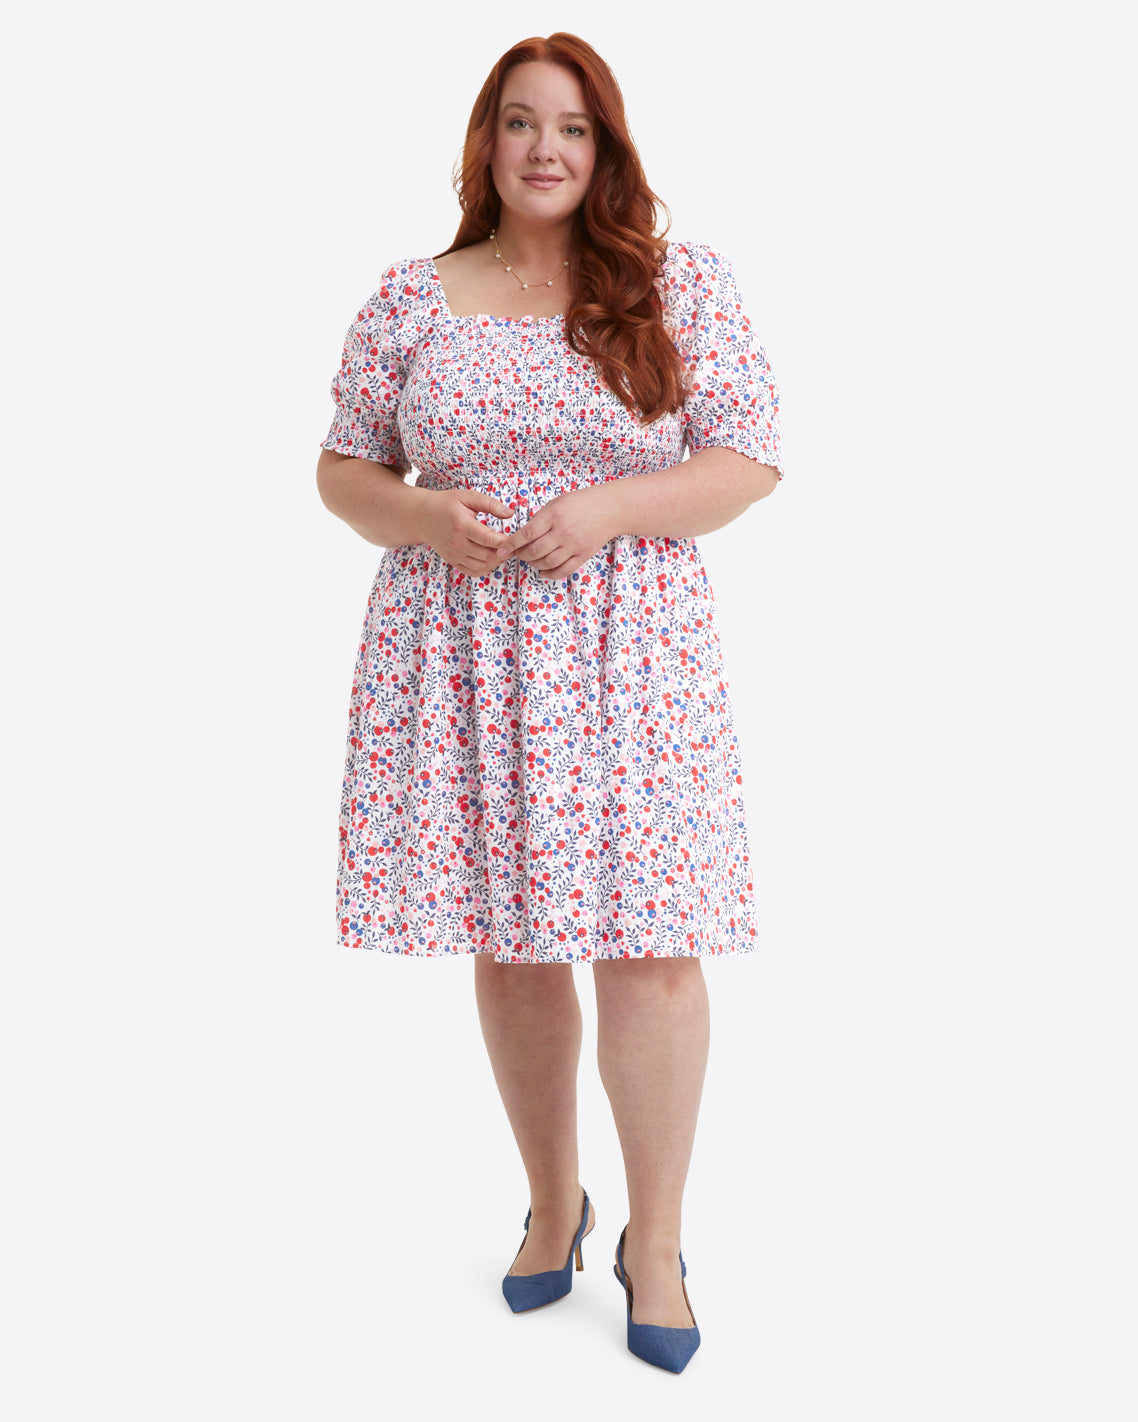 Plus Size Summer Essentials: The Floral Dress from Kohl's